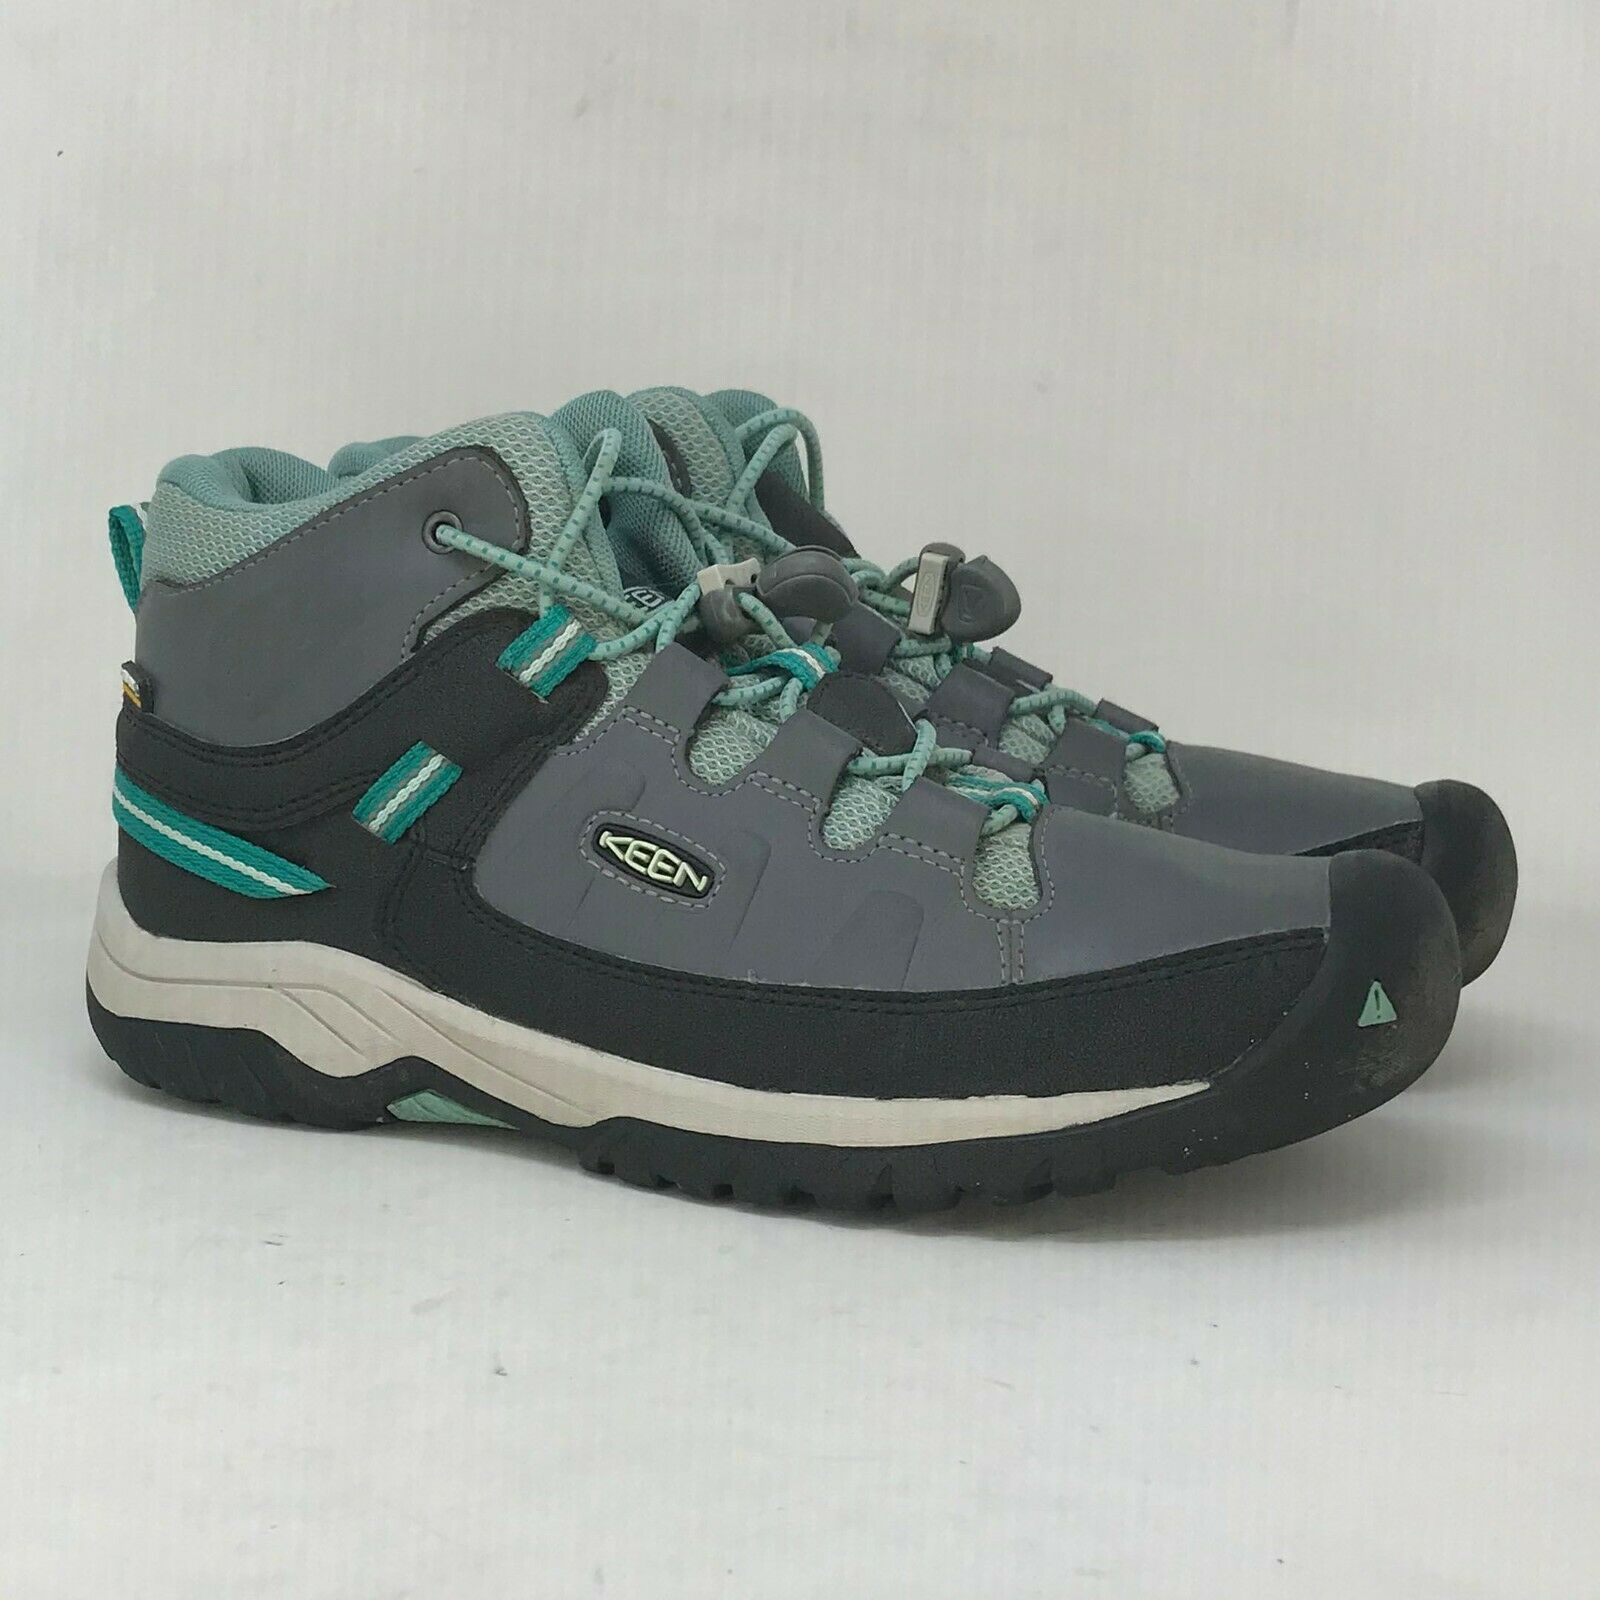 Keen Boys Targhee II 1019836 Gray Blue Black Leather Hiking Boots Ankle Size 6Y